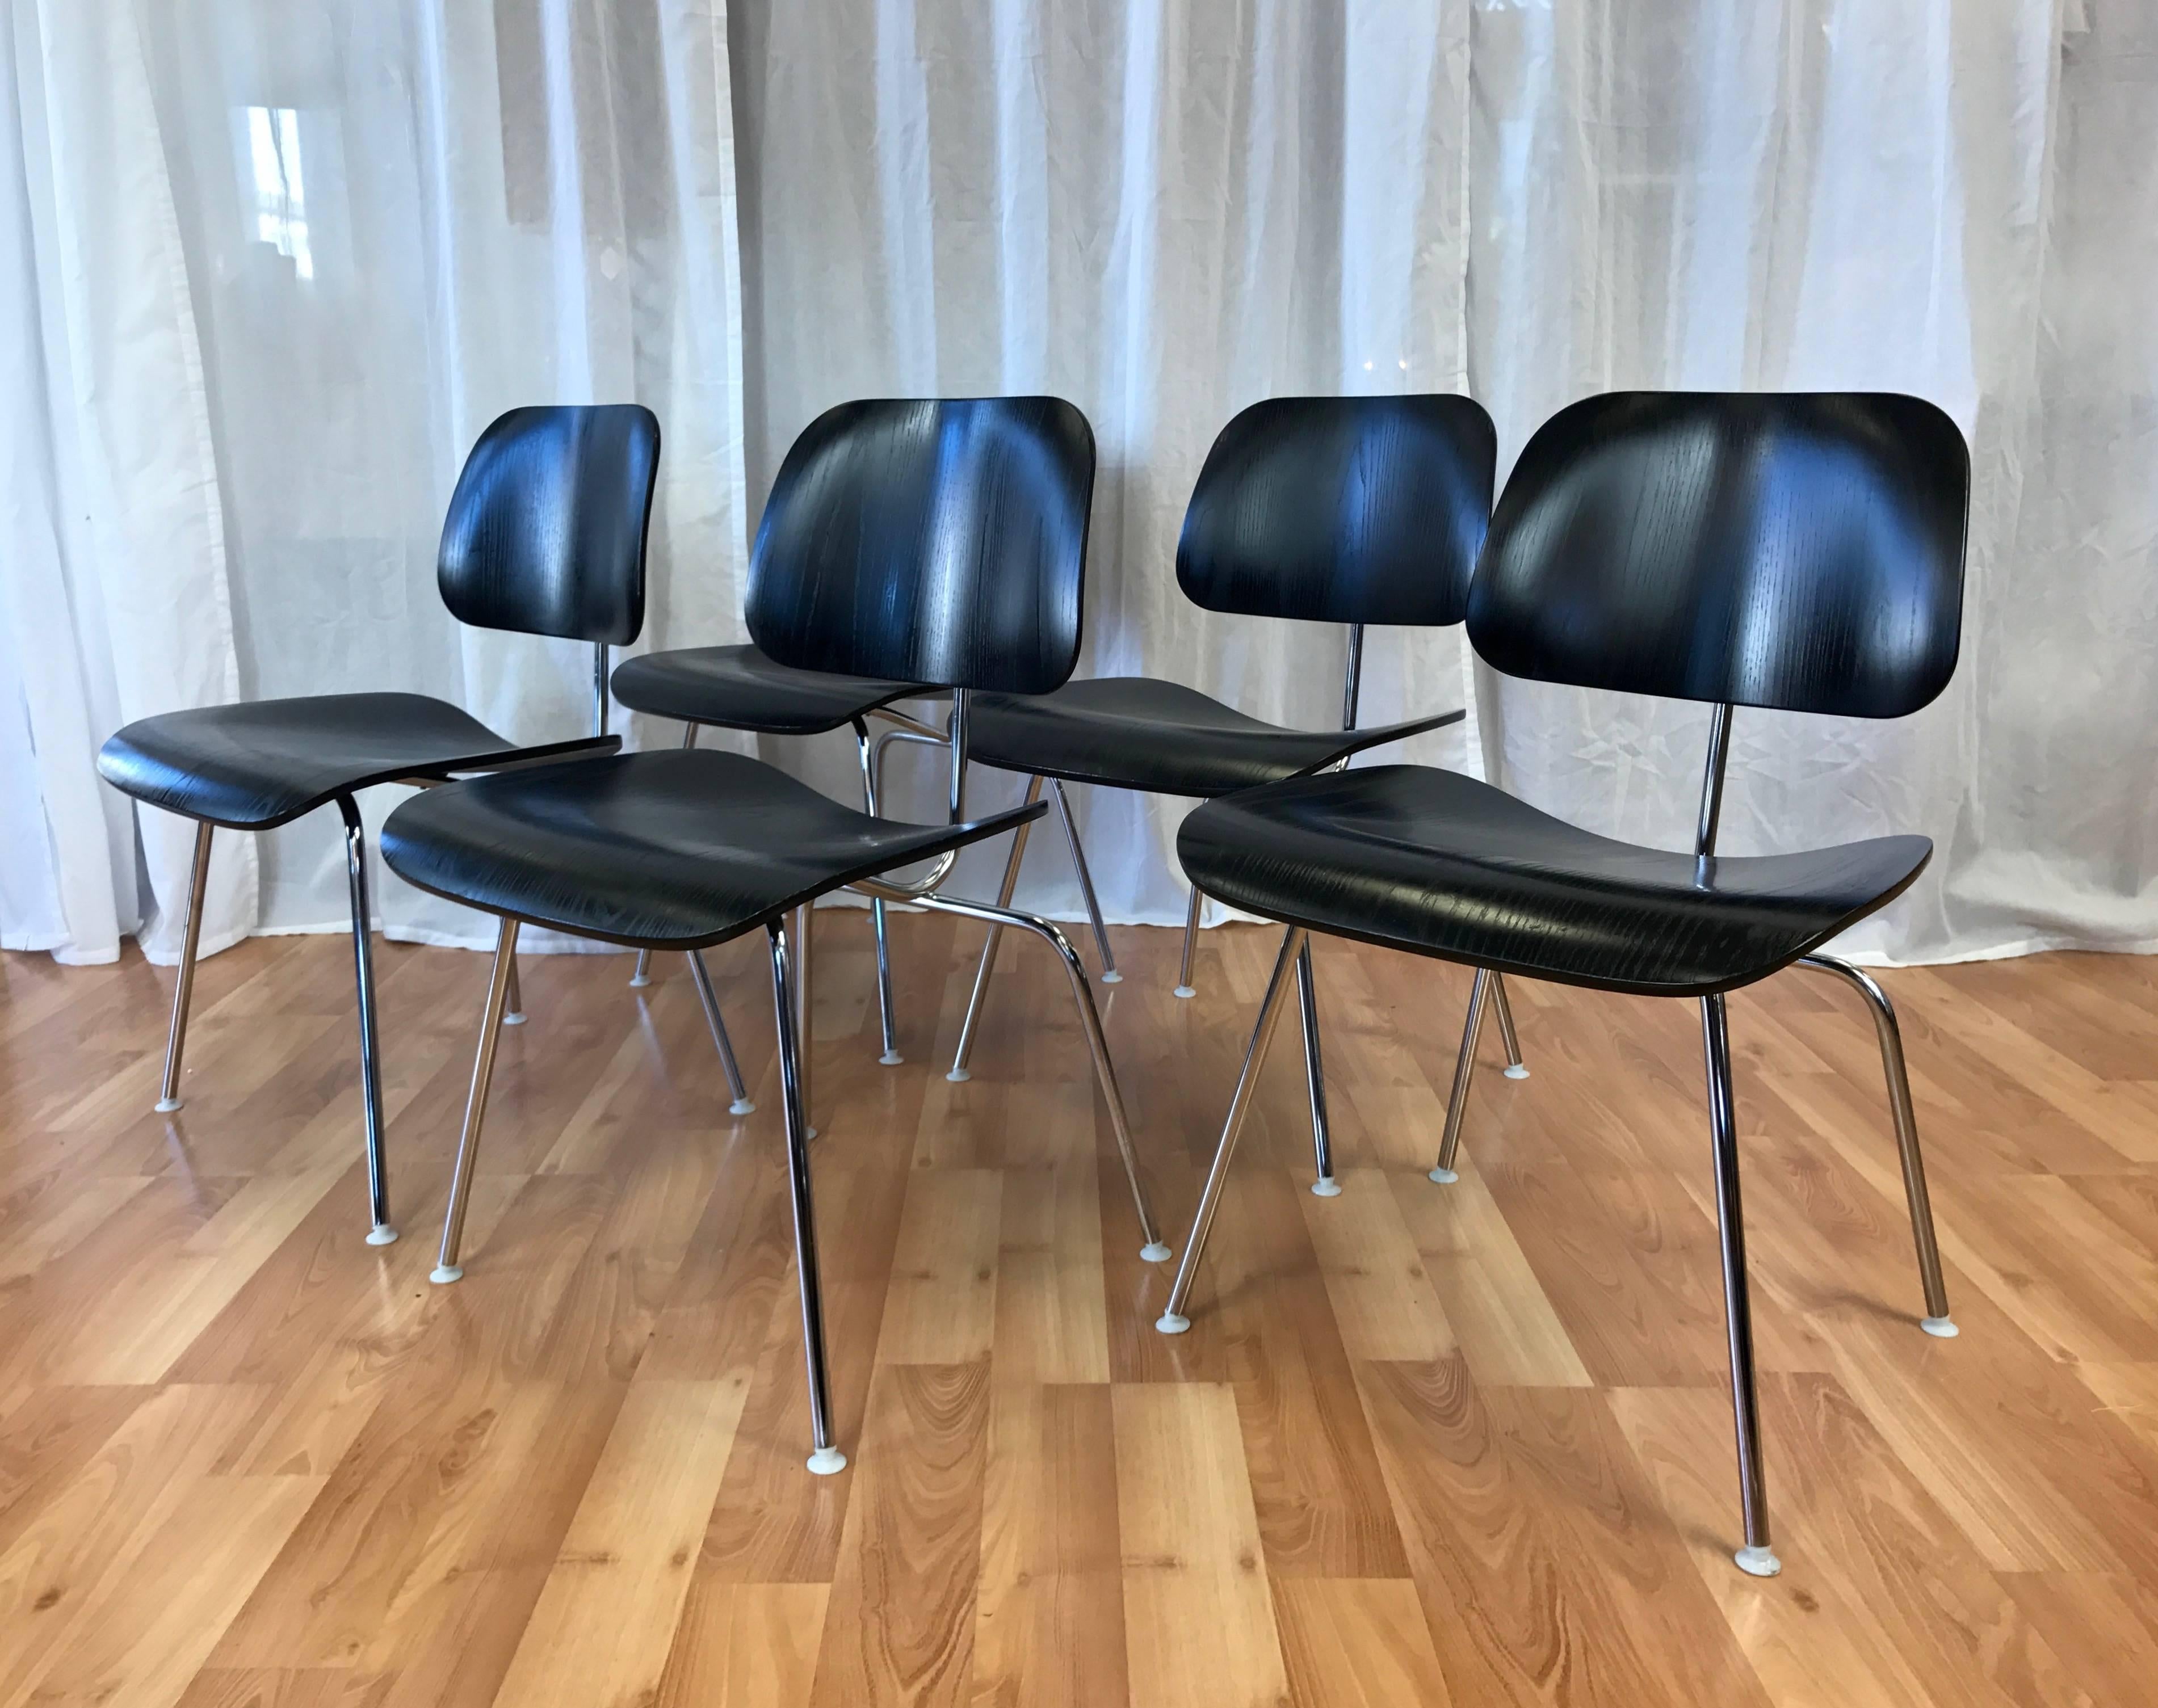 Newer production DCM chairs in ebony by Charles & Ray Eames for Herman Miller.

circa 2006 examples of a Mid-Century Modern design icon introduced in 1946, each in great condition over all. Molded plywood seat and back in ash veneer with ebony